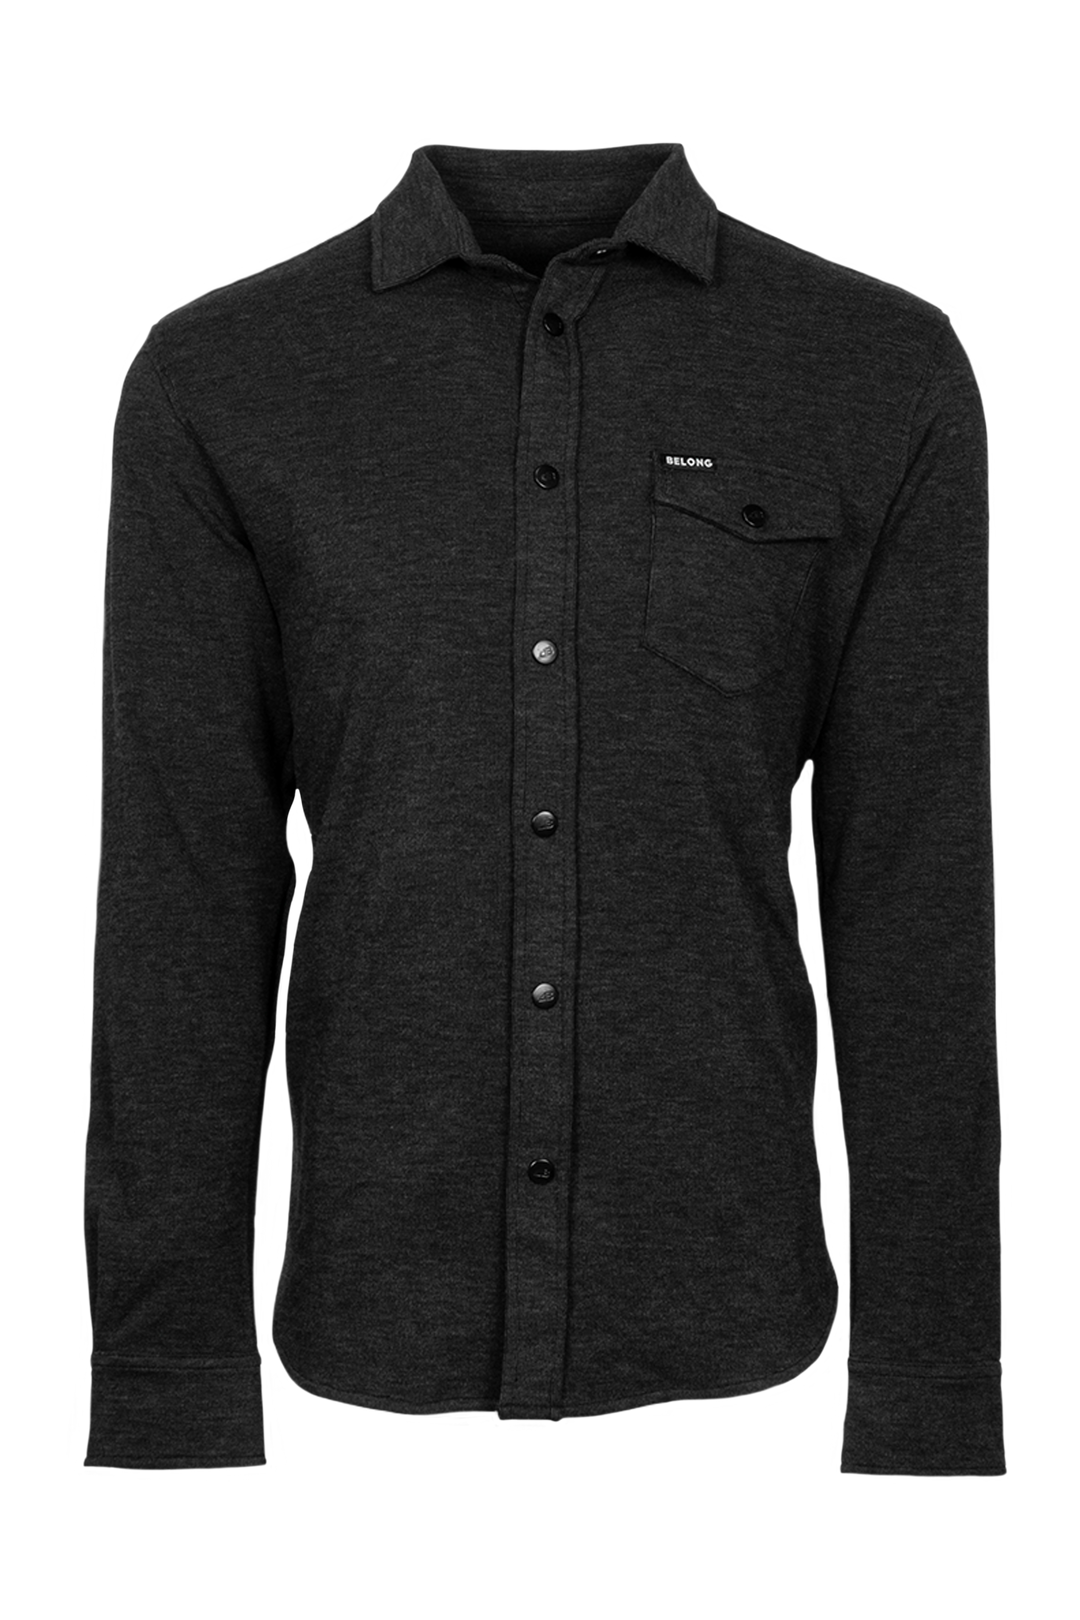 Men's Sherman Fleece Button Up (Discontinued Styles)